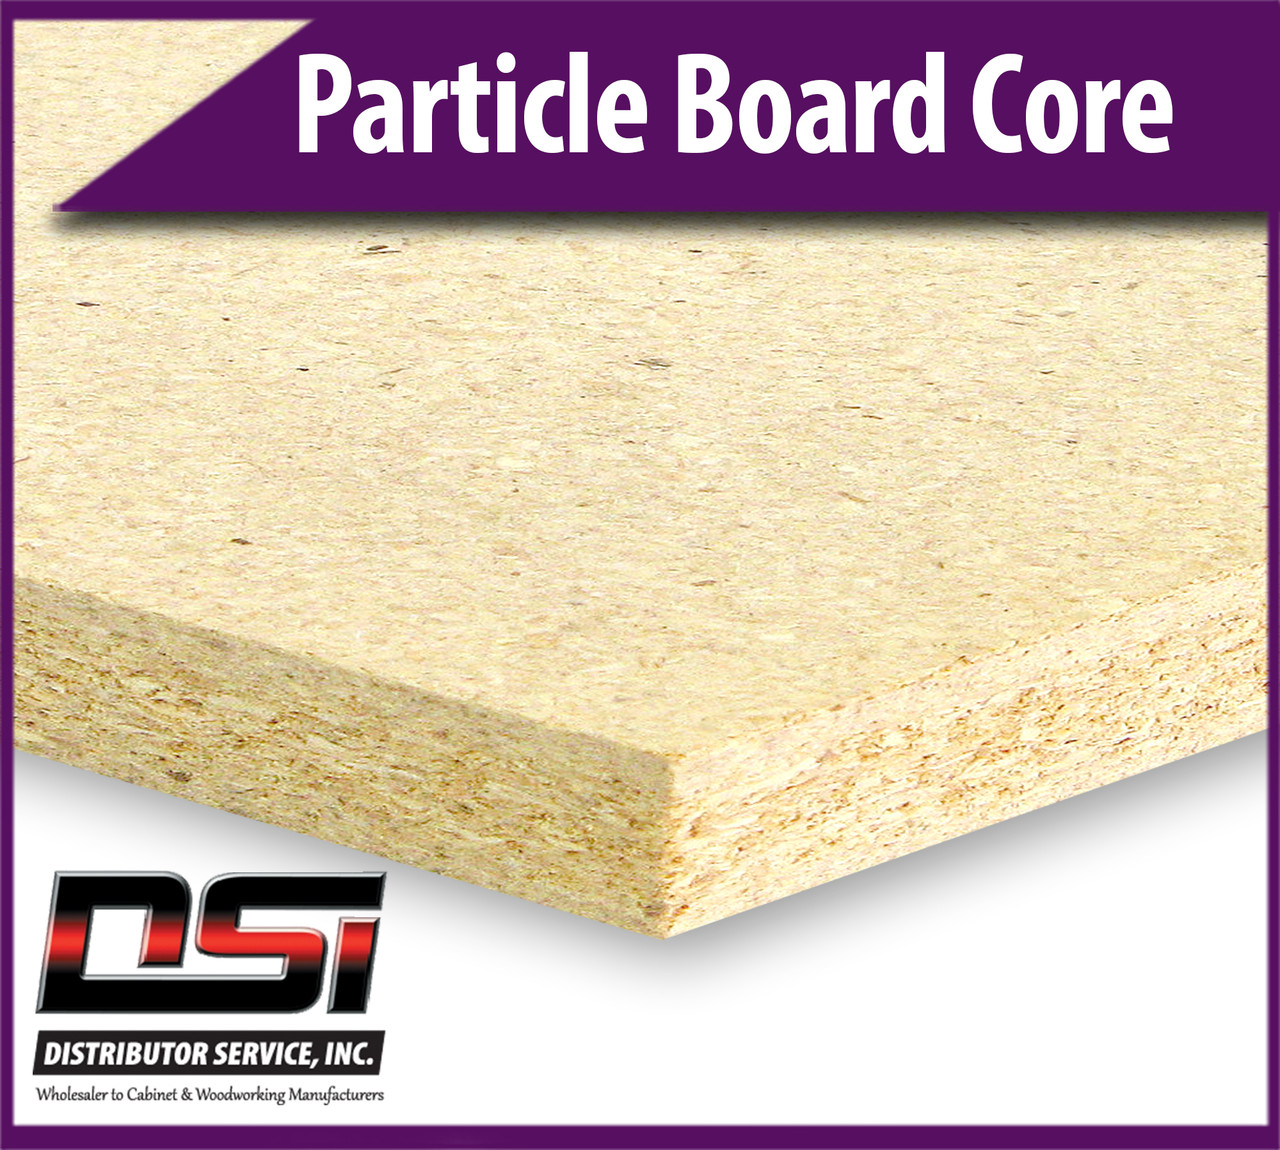 Particle Board Core 3/4" x 25" x 121" Industrial Particleboard Panels